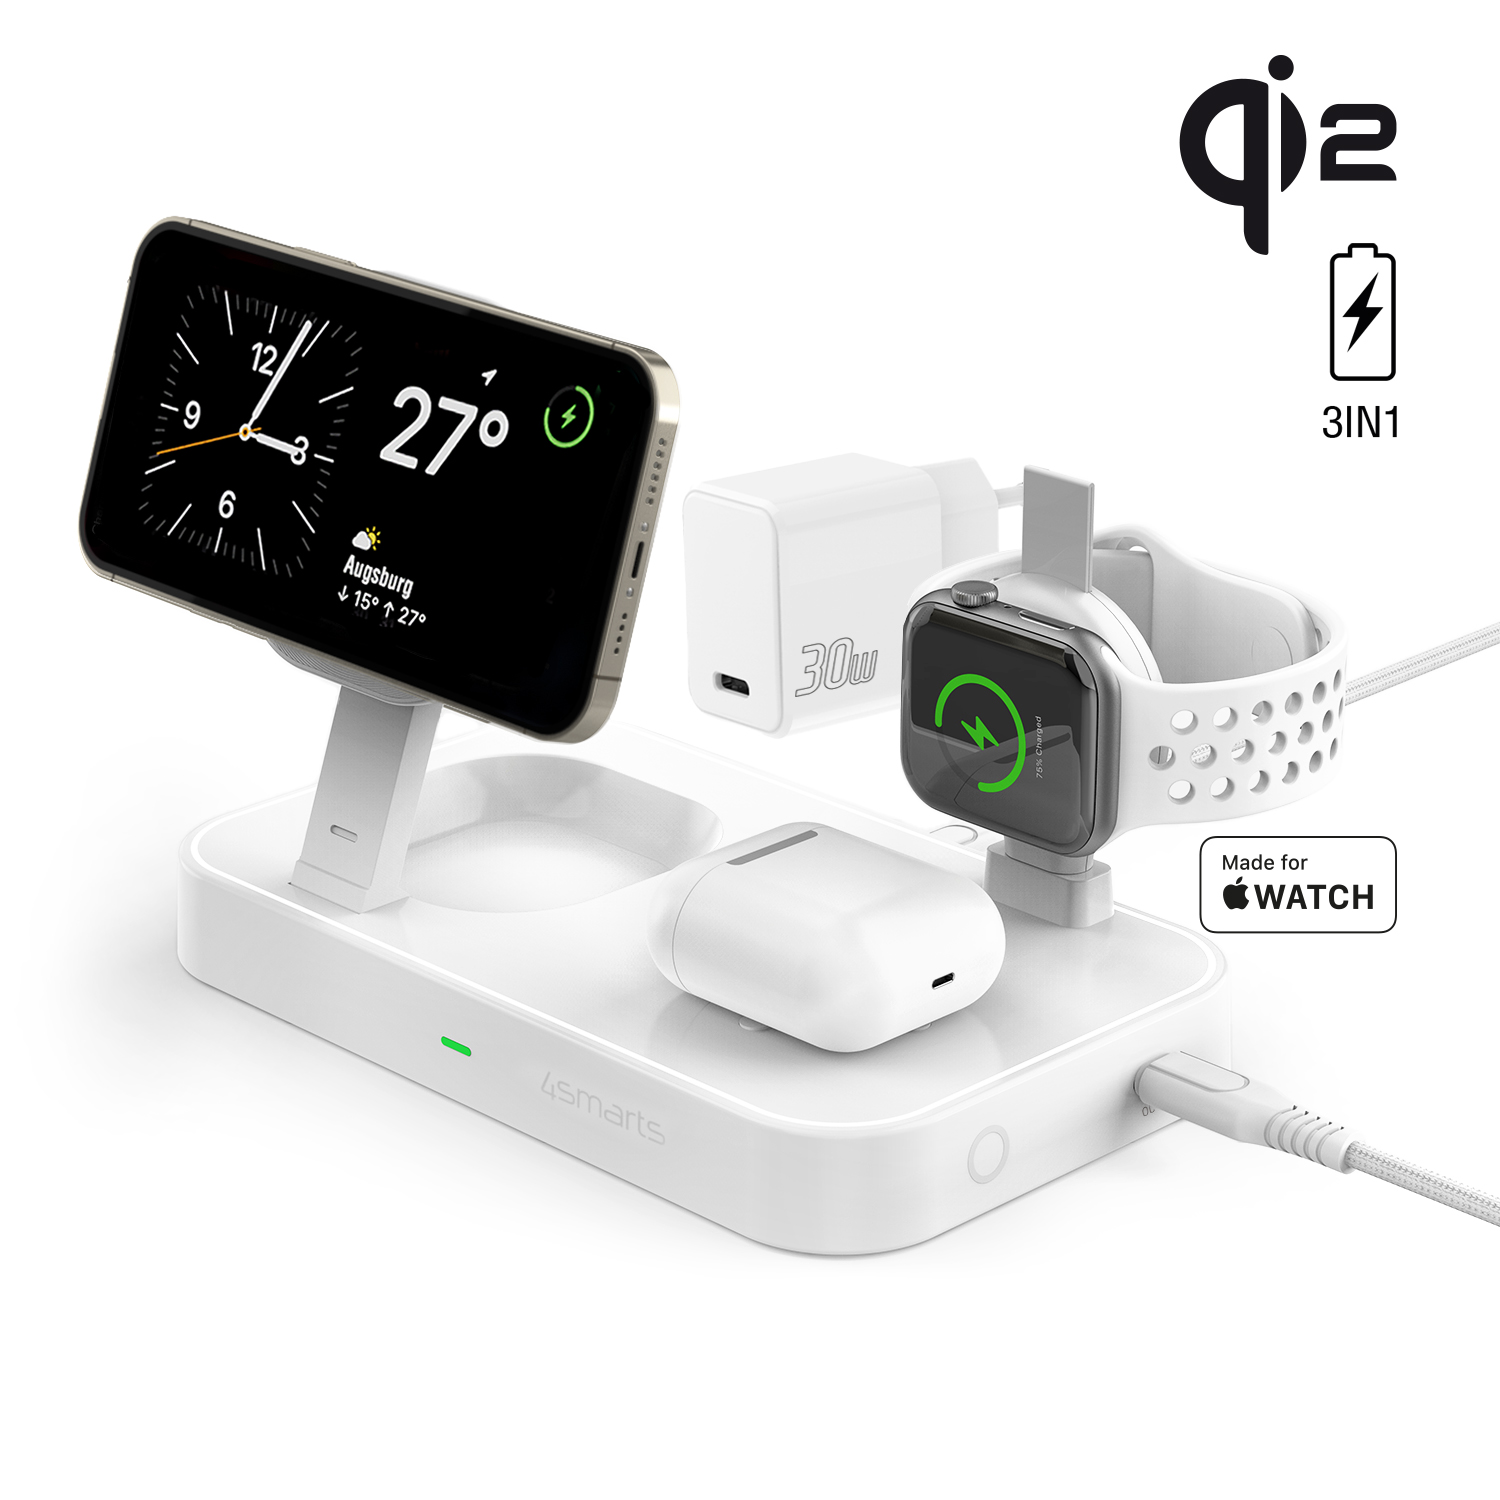 The 4smarts 3-in-1 Qi2 Wireless Charger Station charges your iPhone, Apple Watch and TWS Headset at the same time.